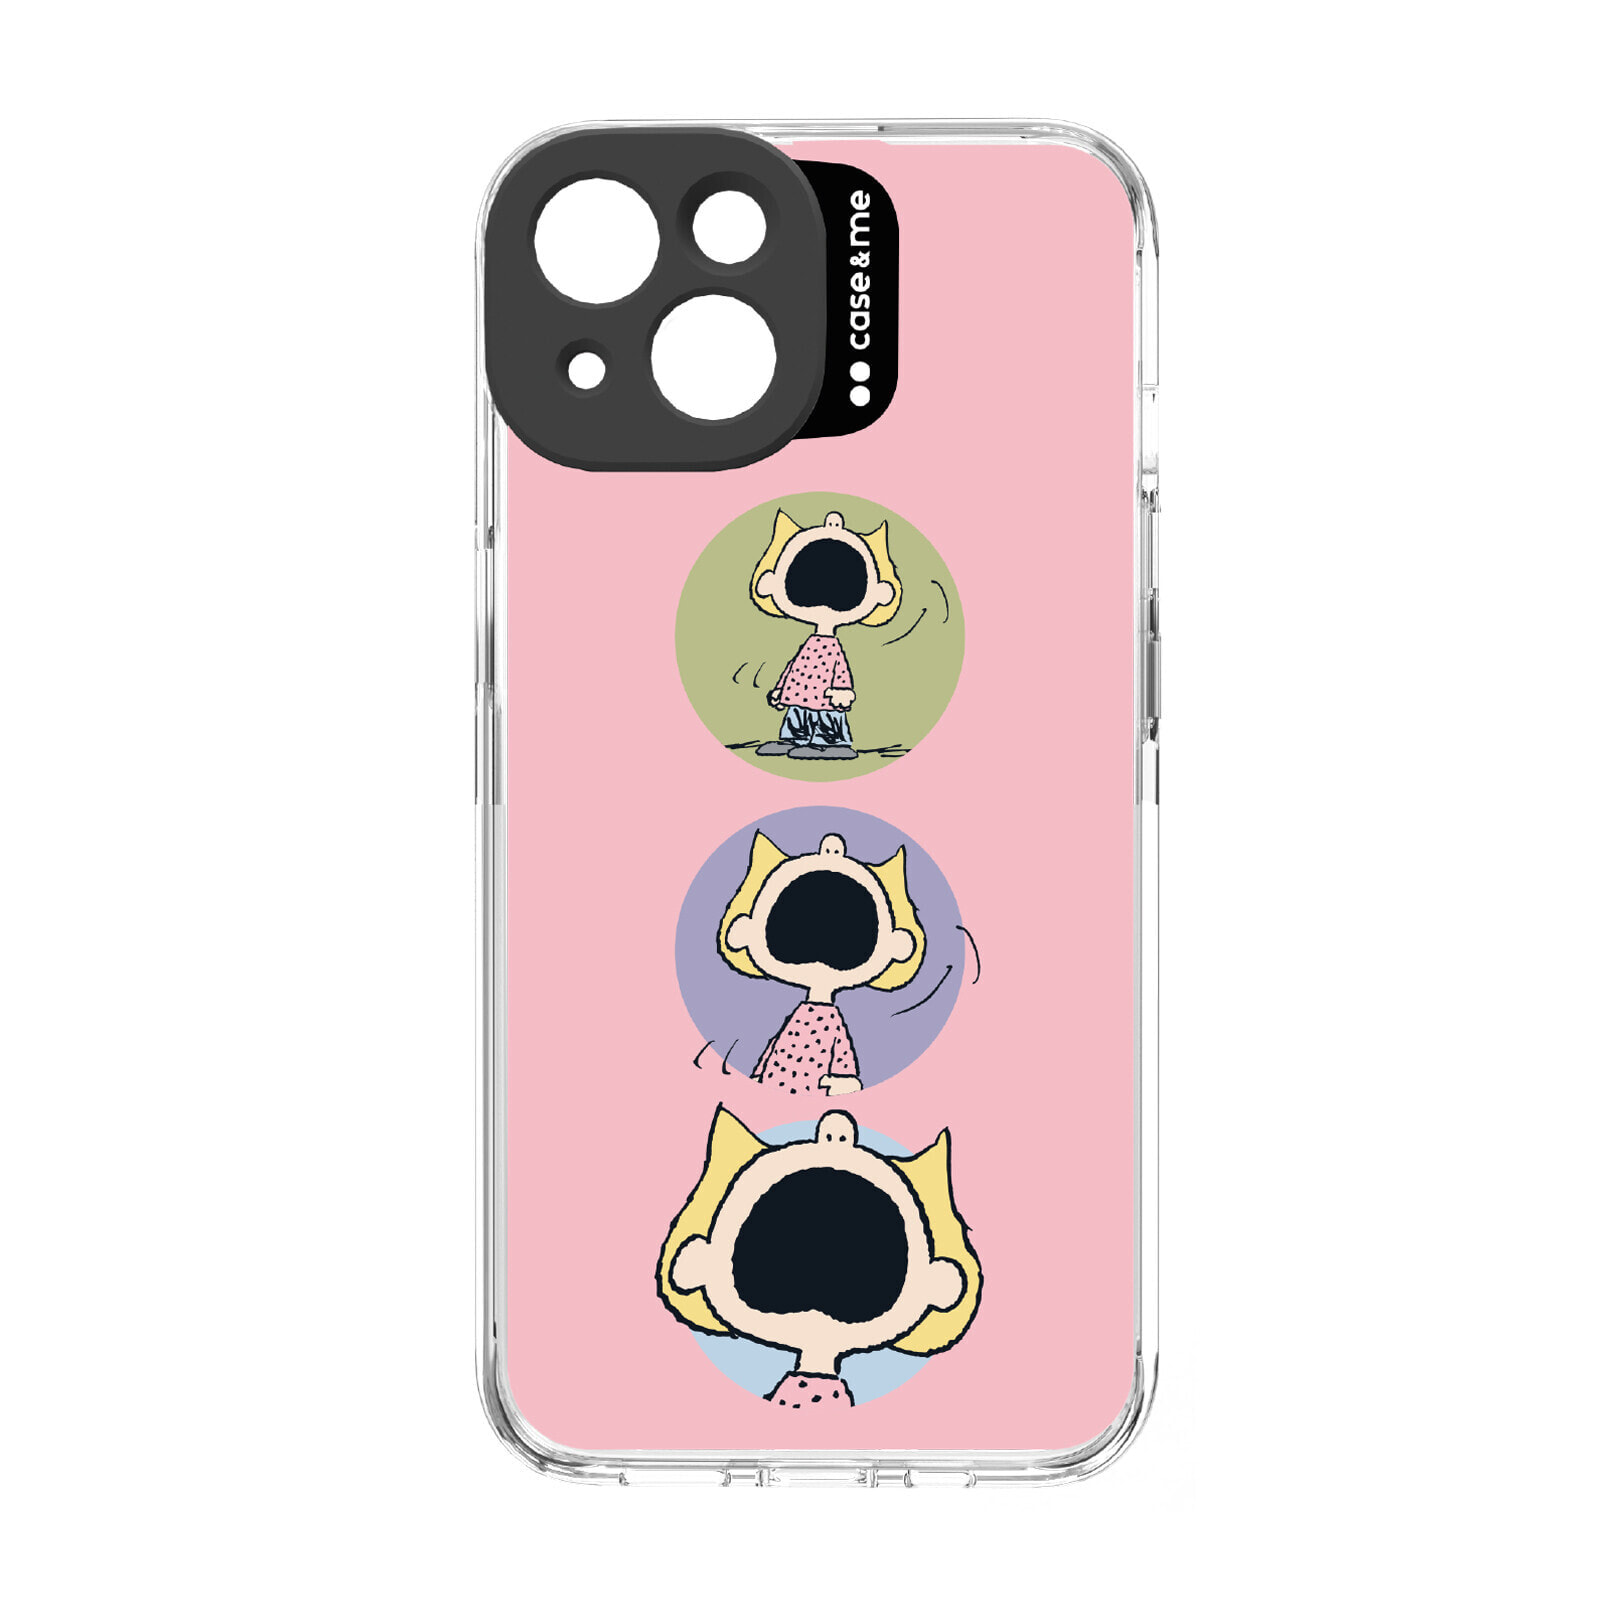 SBS CMPNUTSCOVCIP14613 - Cover - Apple - iPhone 14 - 15.5 cm (6.1